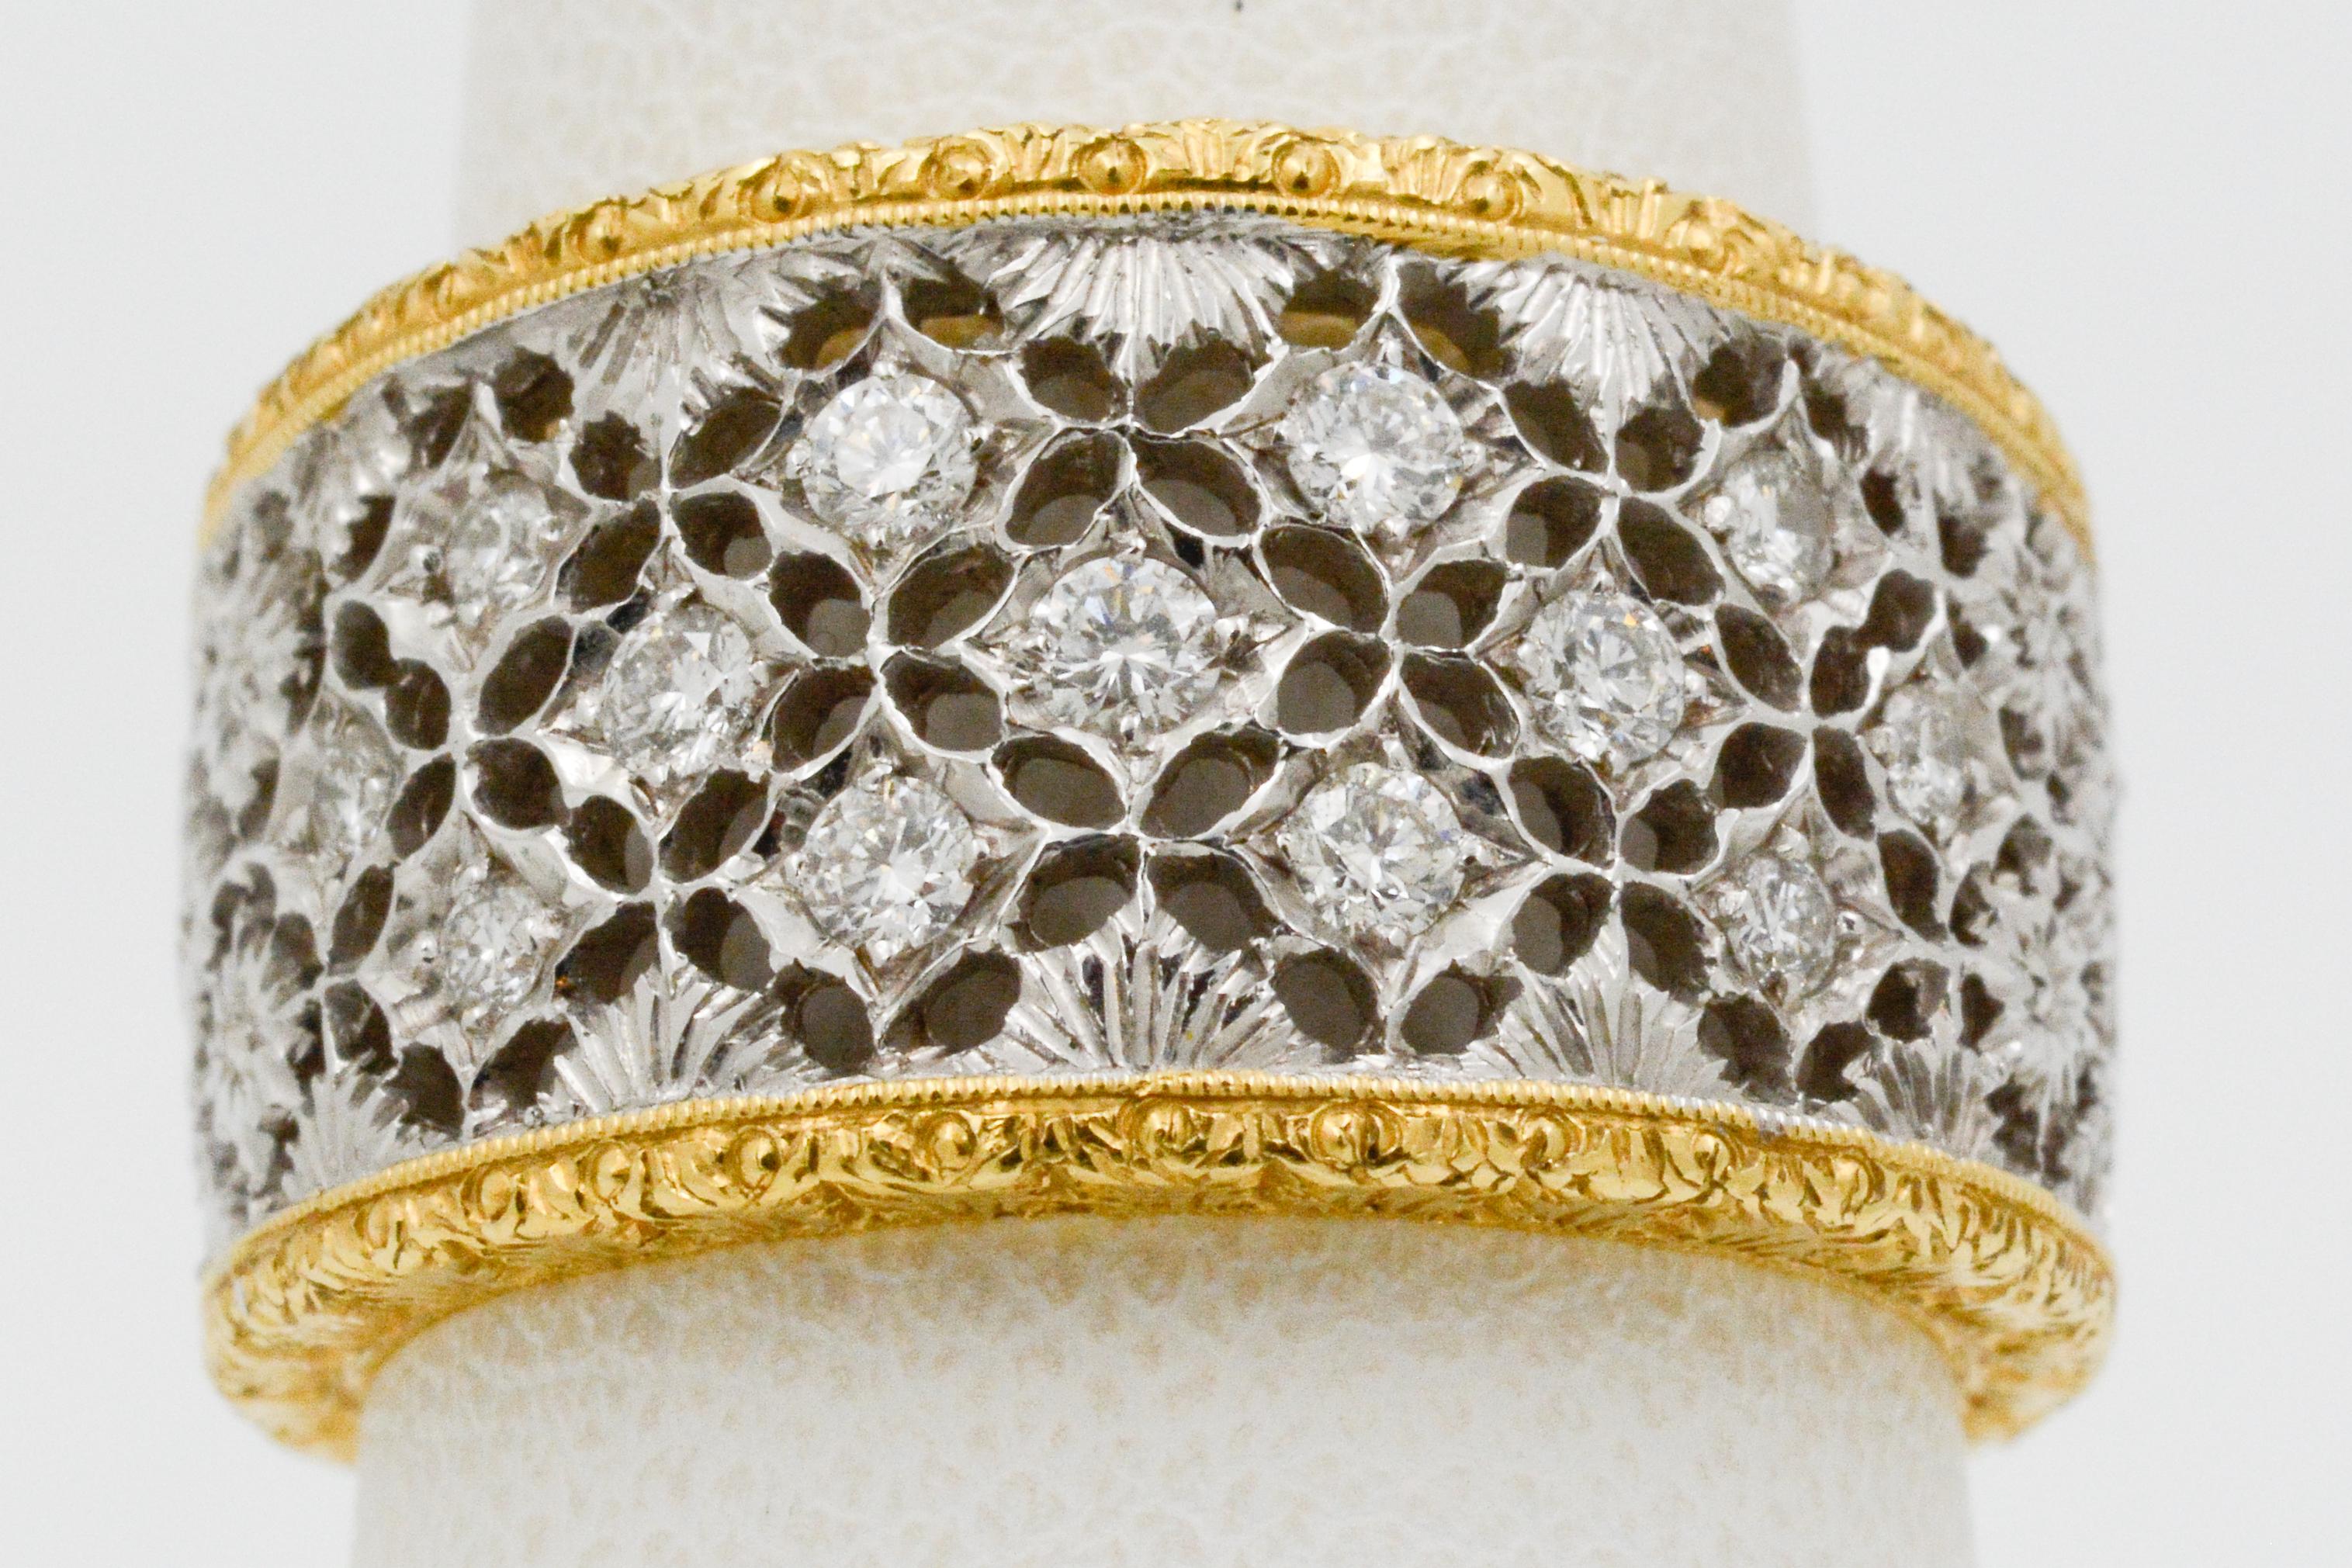 This ring has a unique filigree design showcasing 13 round brilliant diamonds, weighing approximately 0.34 carats. The diamonds are surrounded by 18 karat white and yellow gold etched flowers and engraved edges. The ring measures at 12 x 18mm and